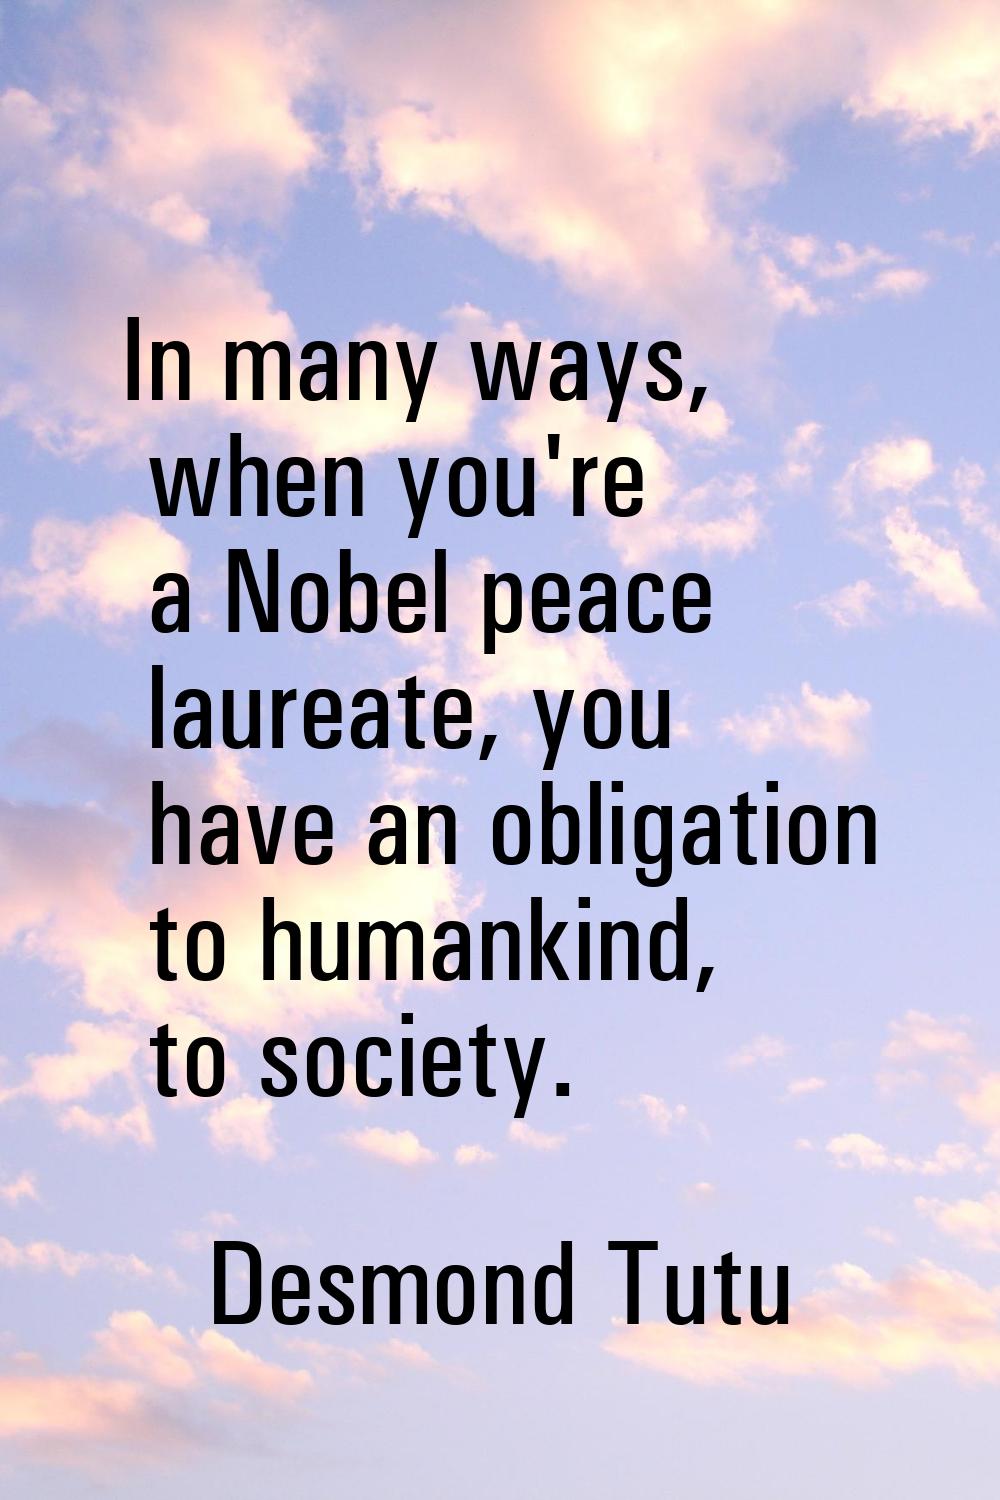 In many ways, when you're a Nobel peace laureate, you have an obligation to humankind, to society.